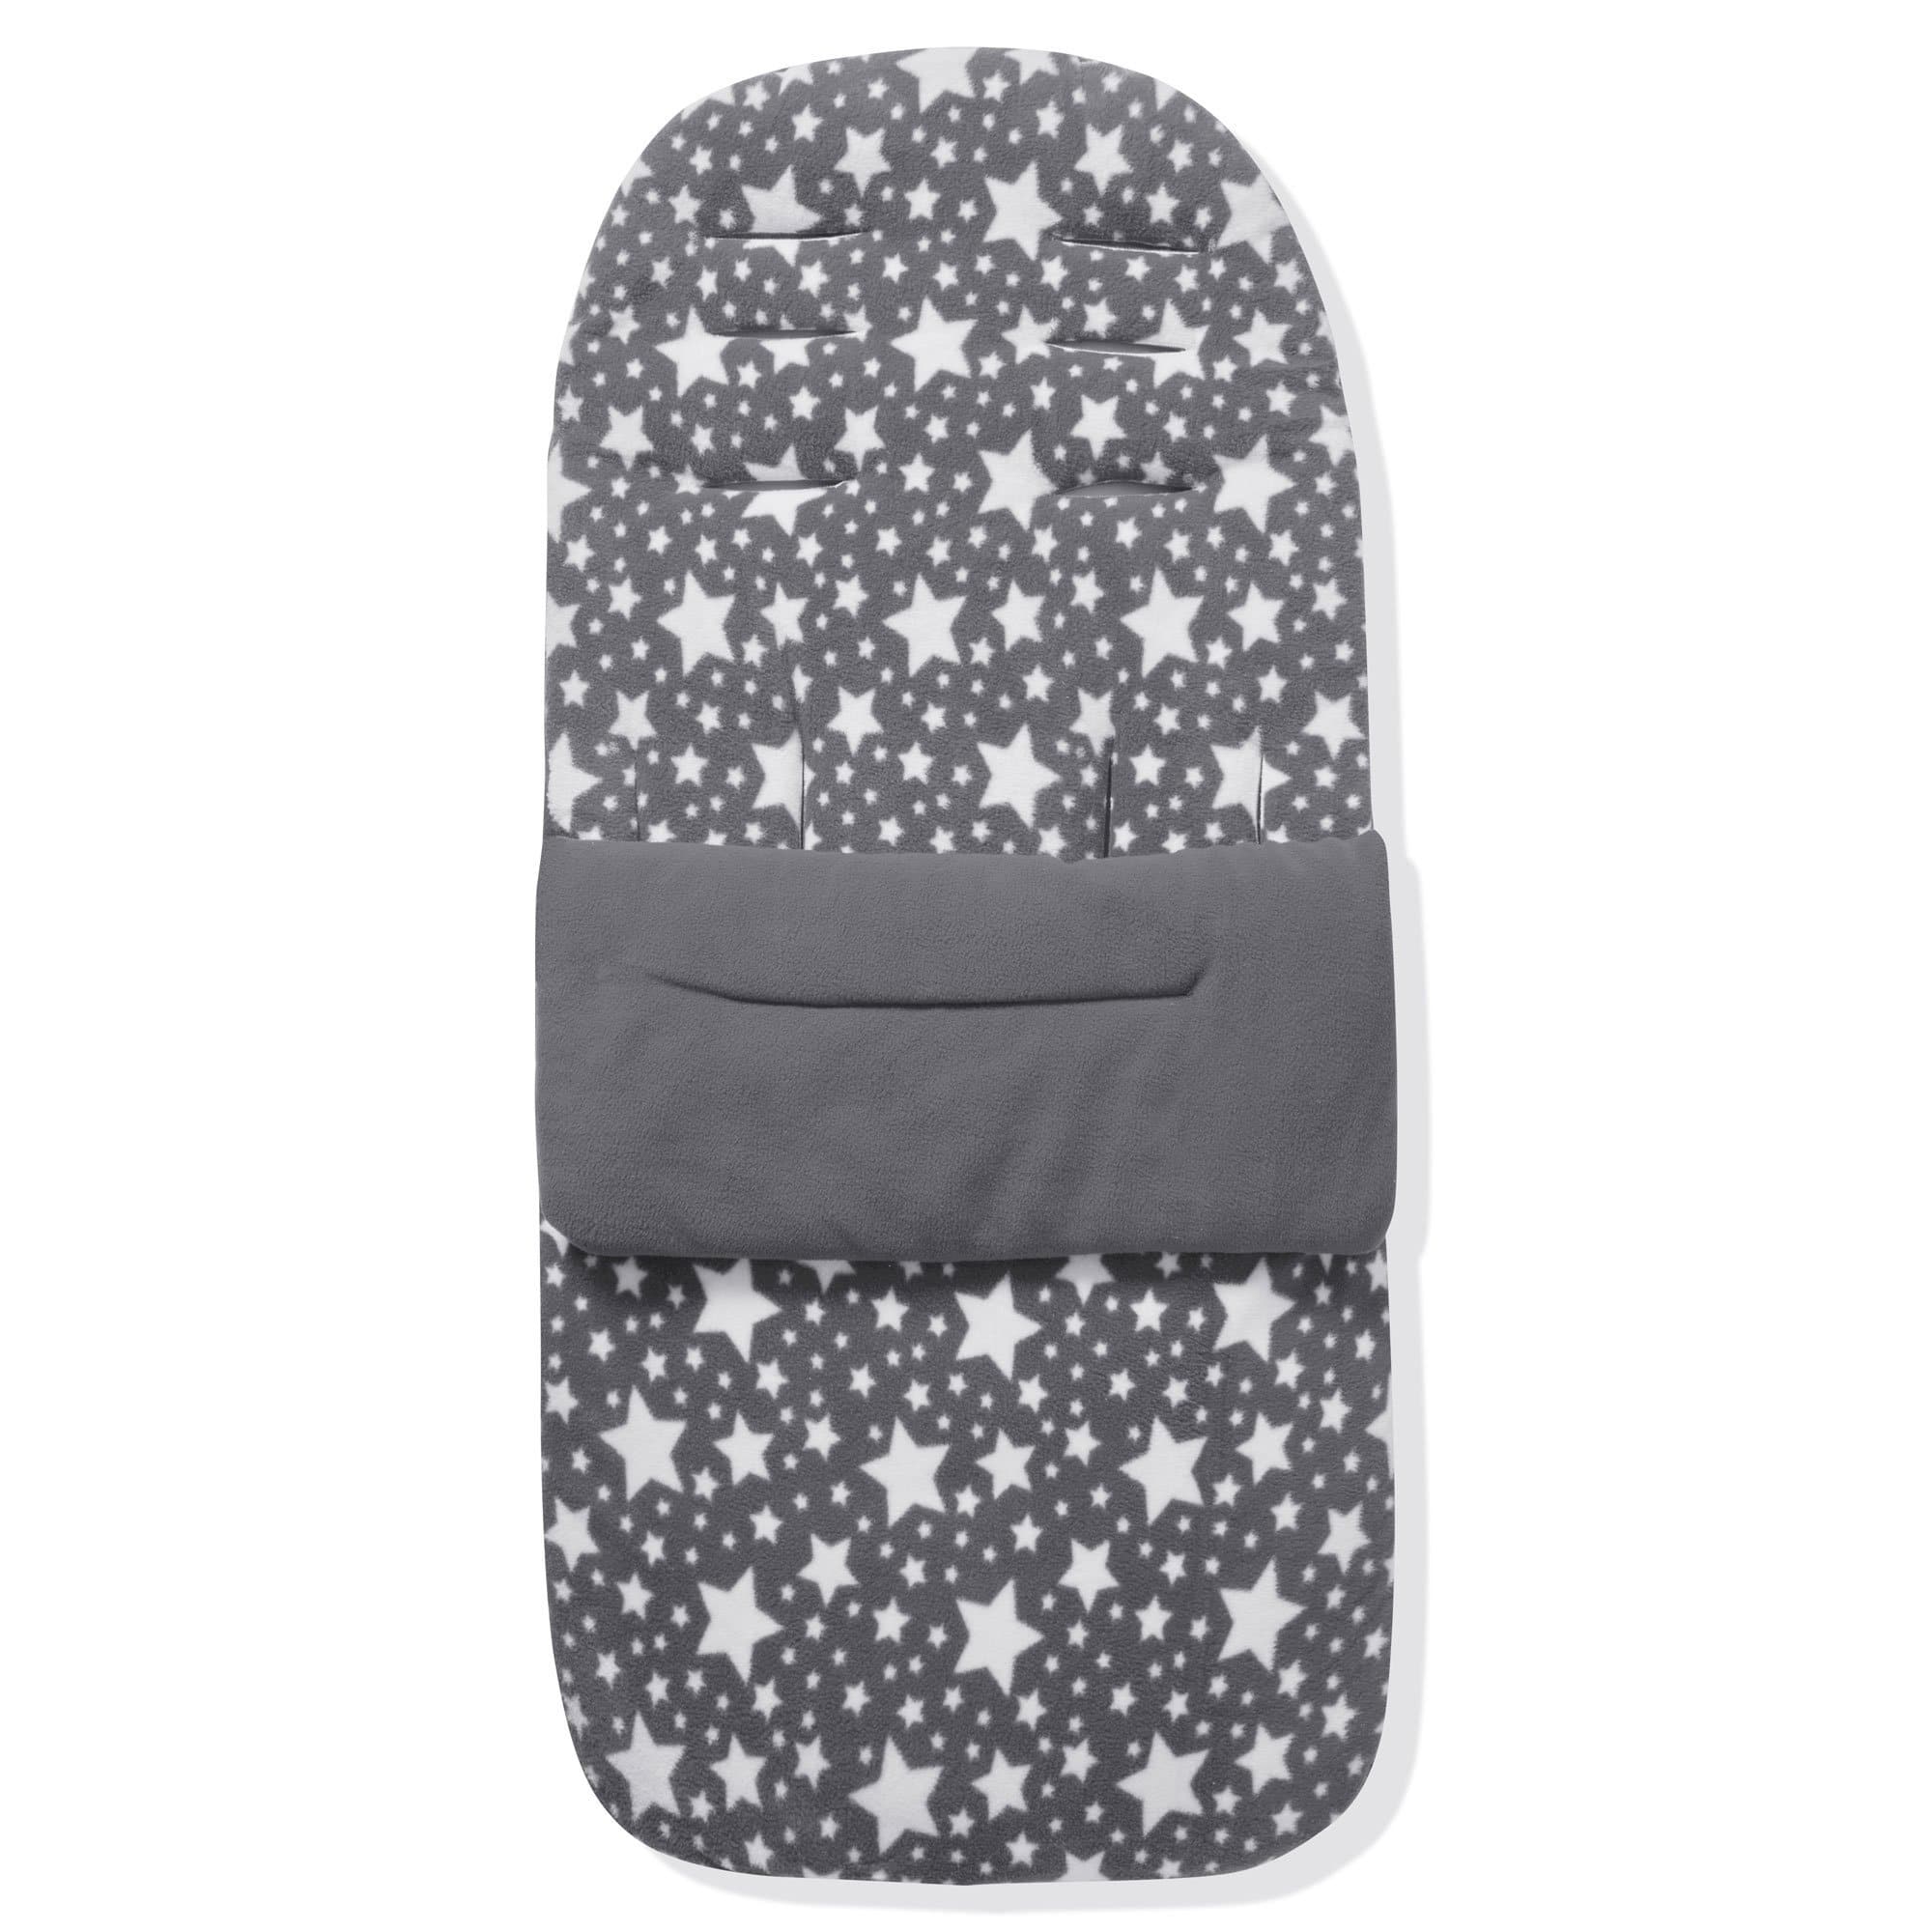 Fleece Footmuff / Cosy Toes Compatible with Maclaren - For Your Little One